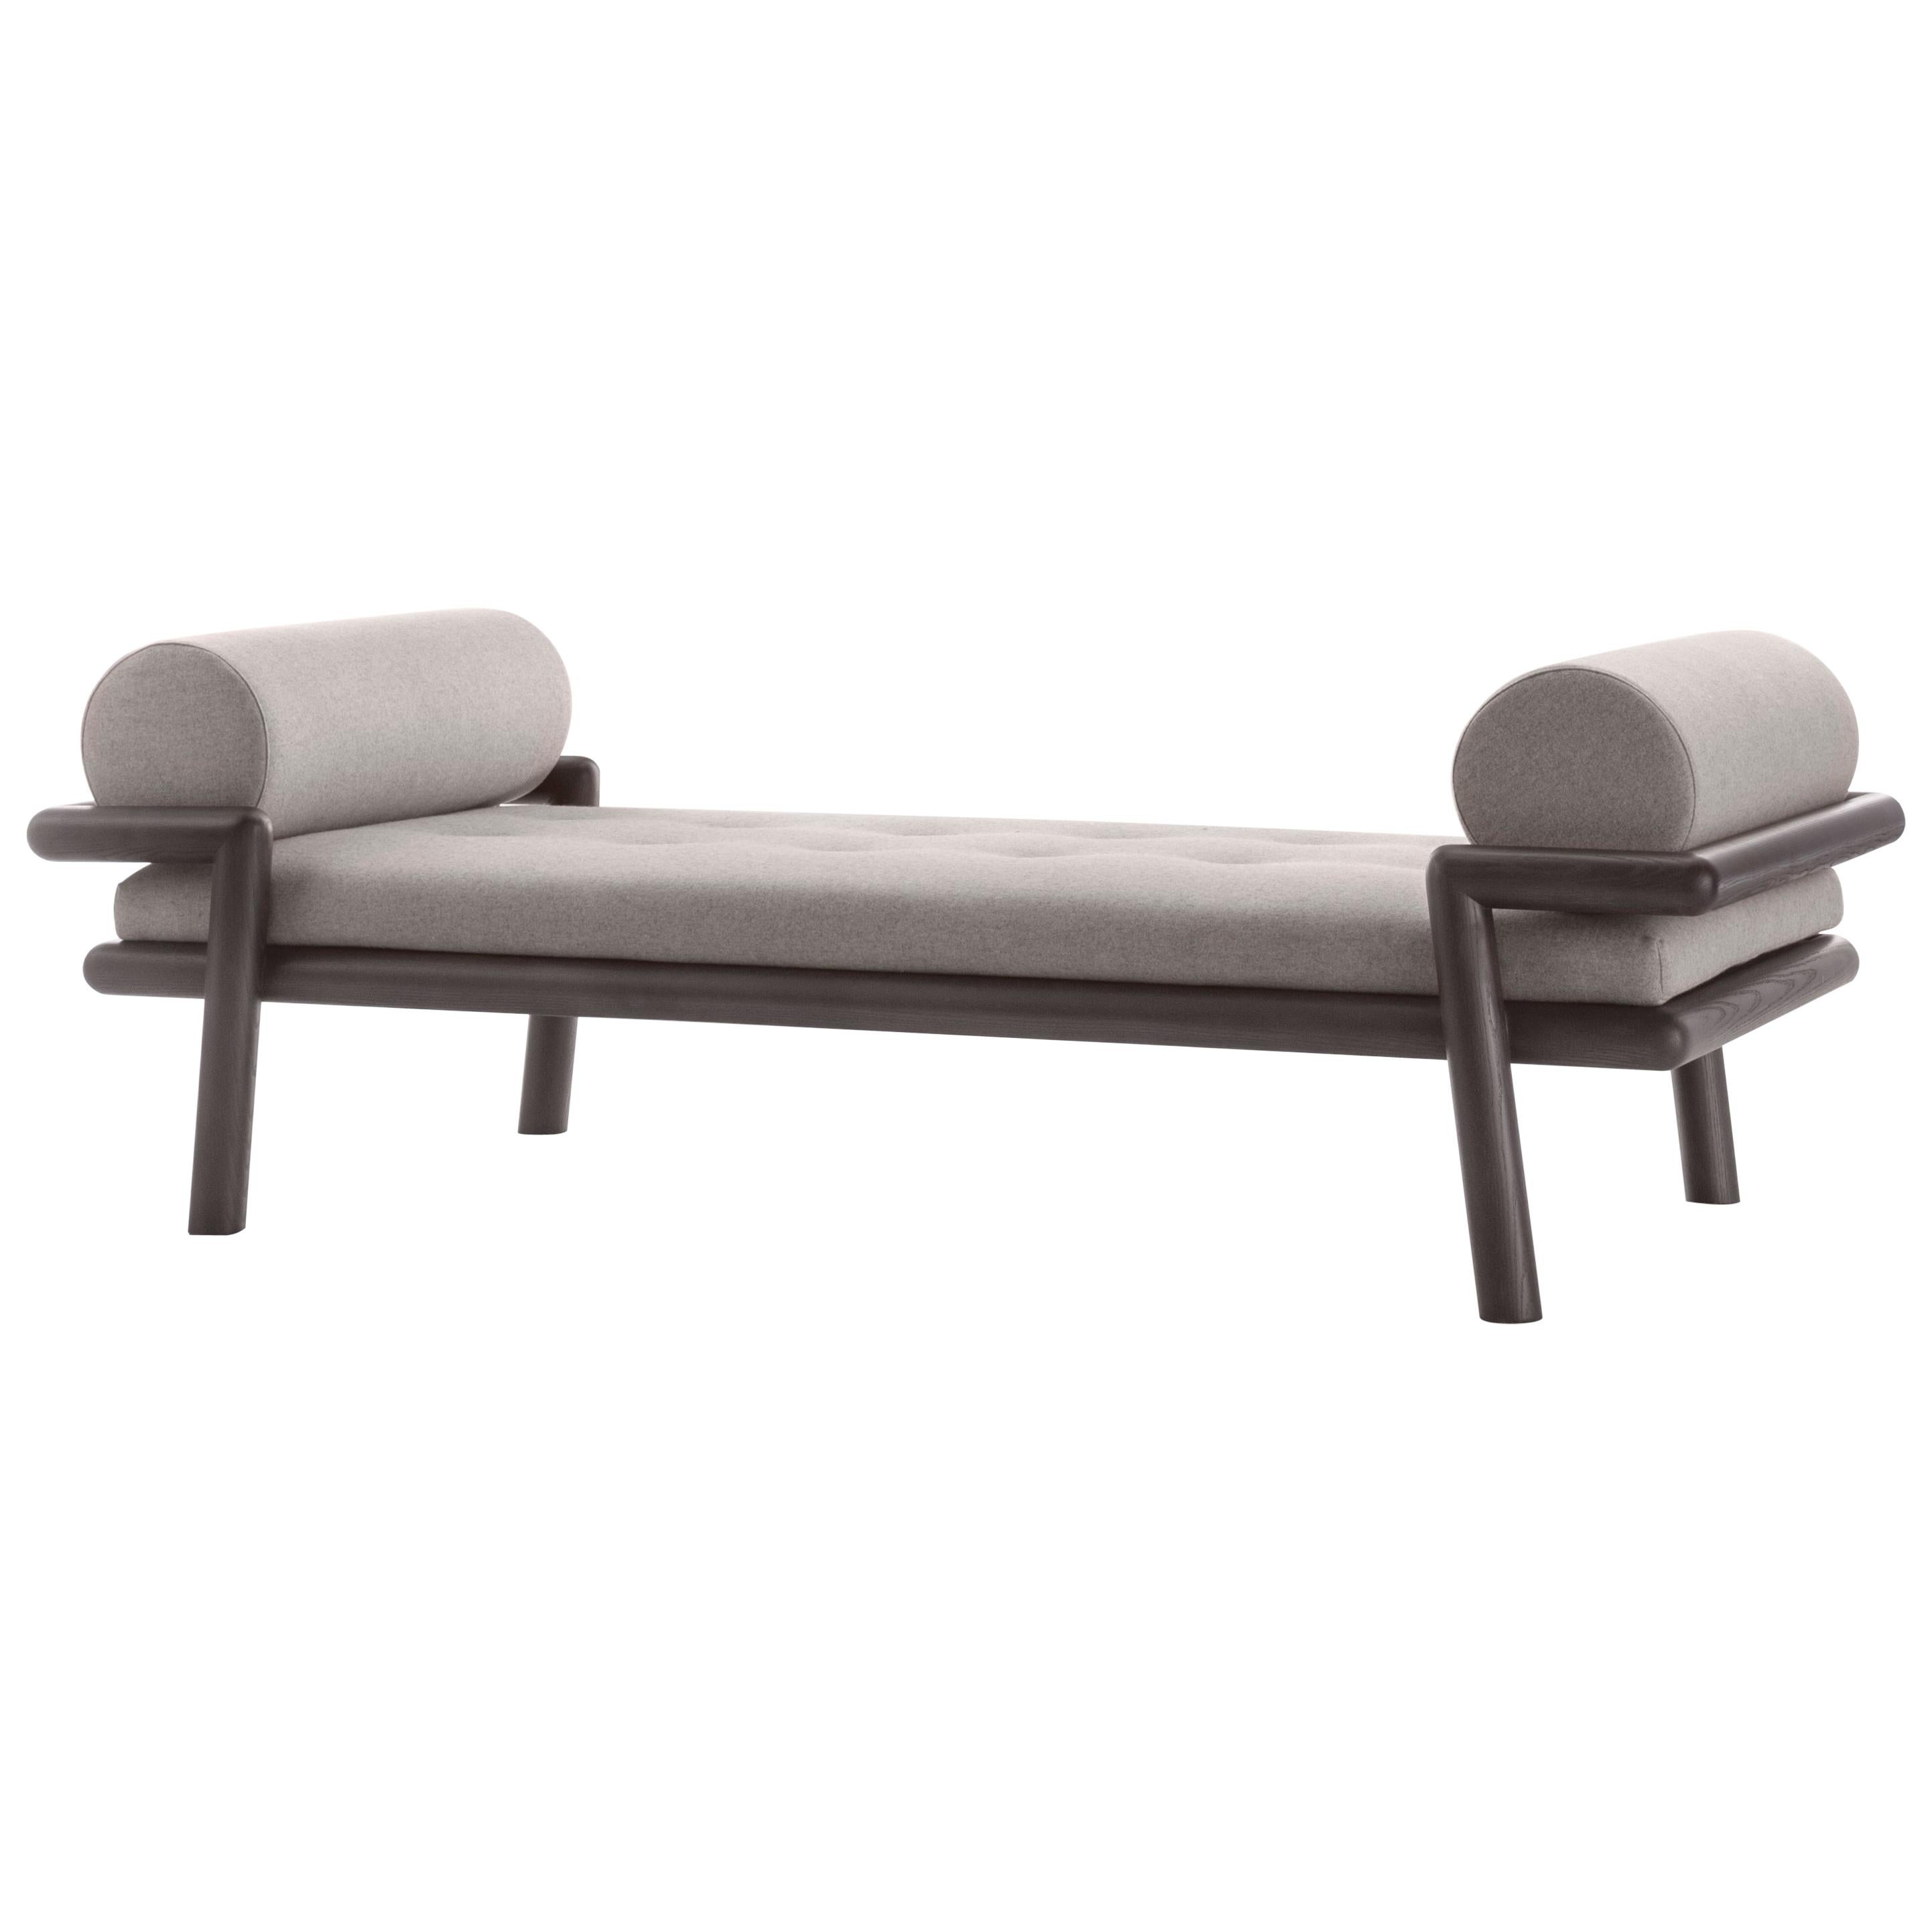 Gebrüder Thonet Vienna GmbH Hold On Daybed in Wenge Wood with Upholstered Seat For Sale